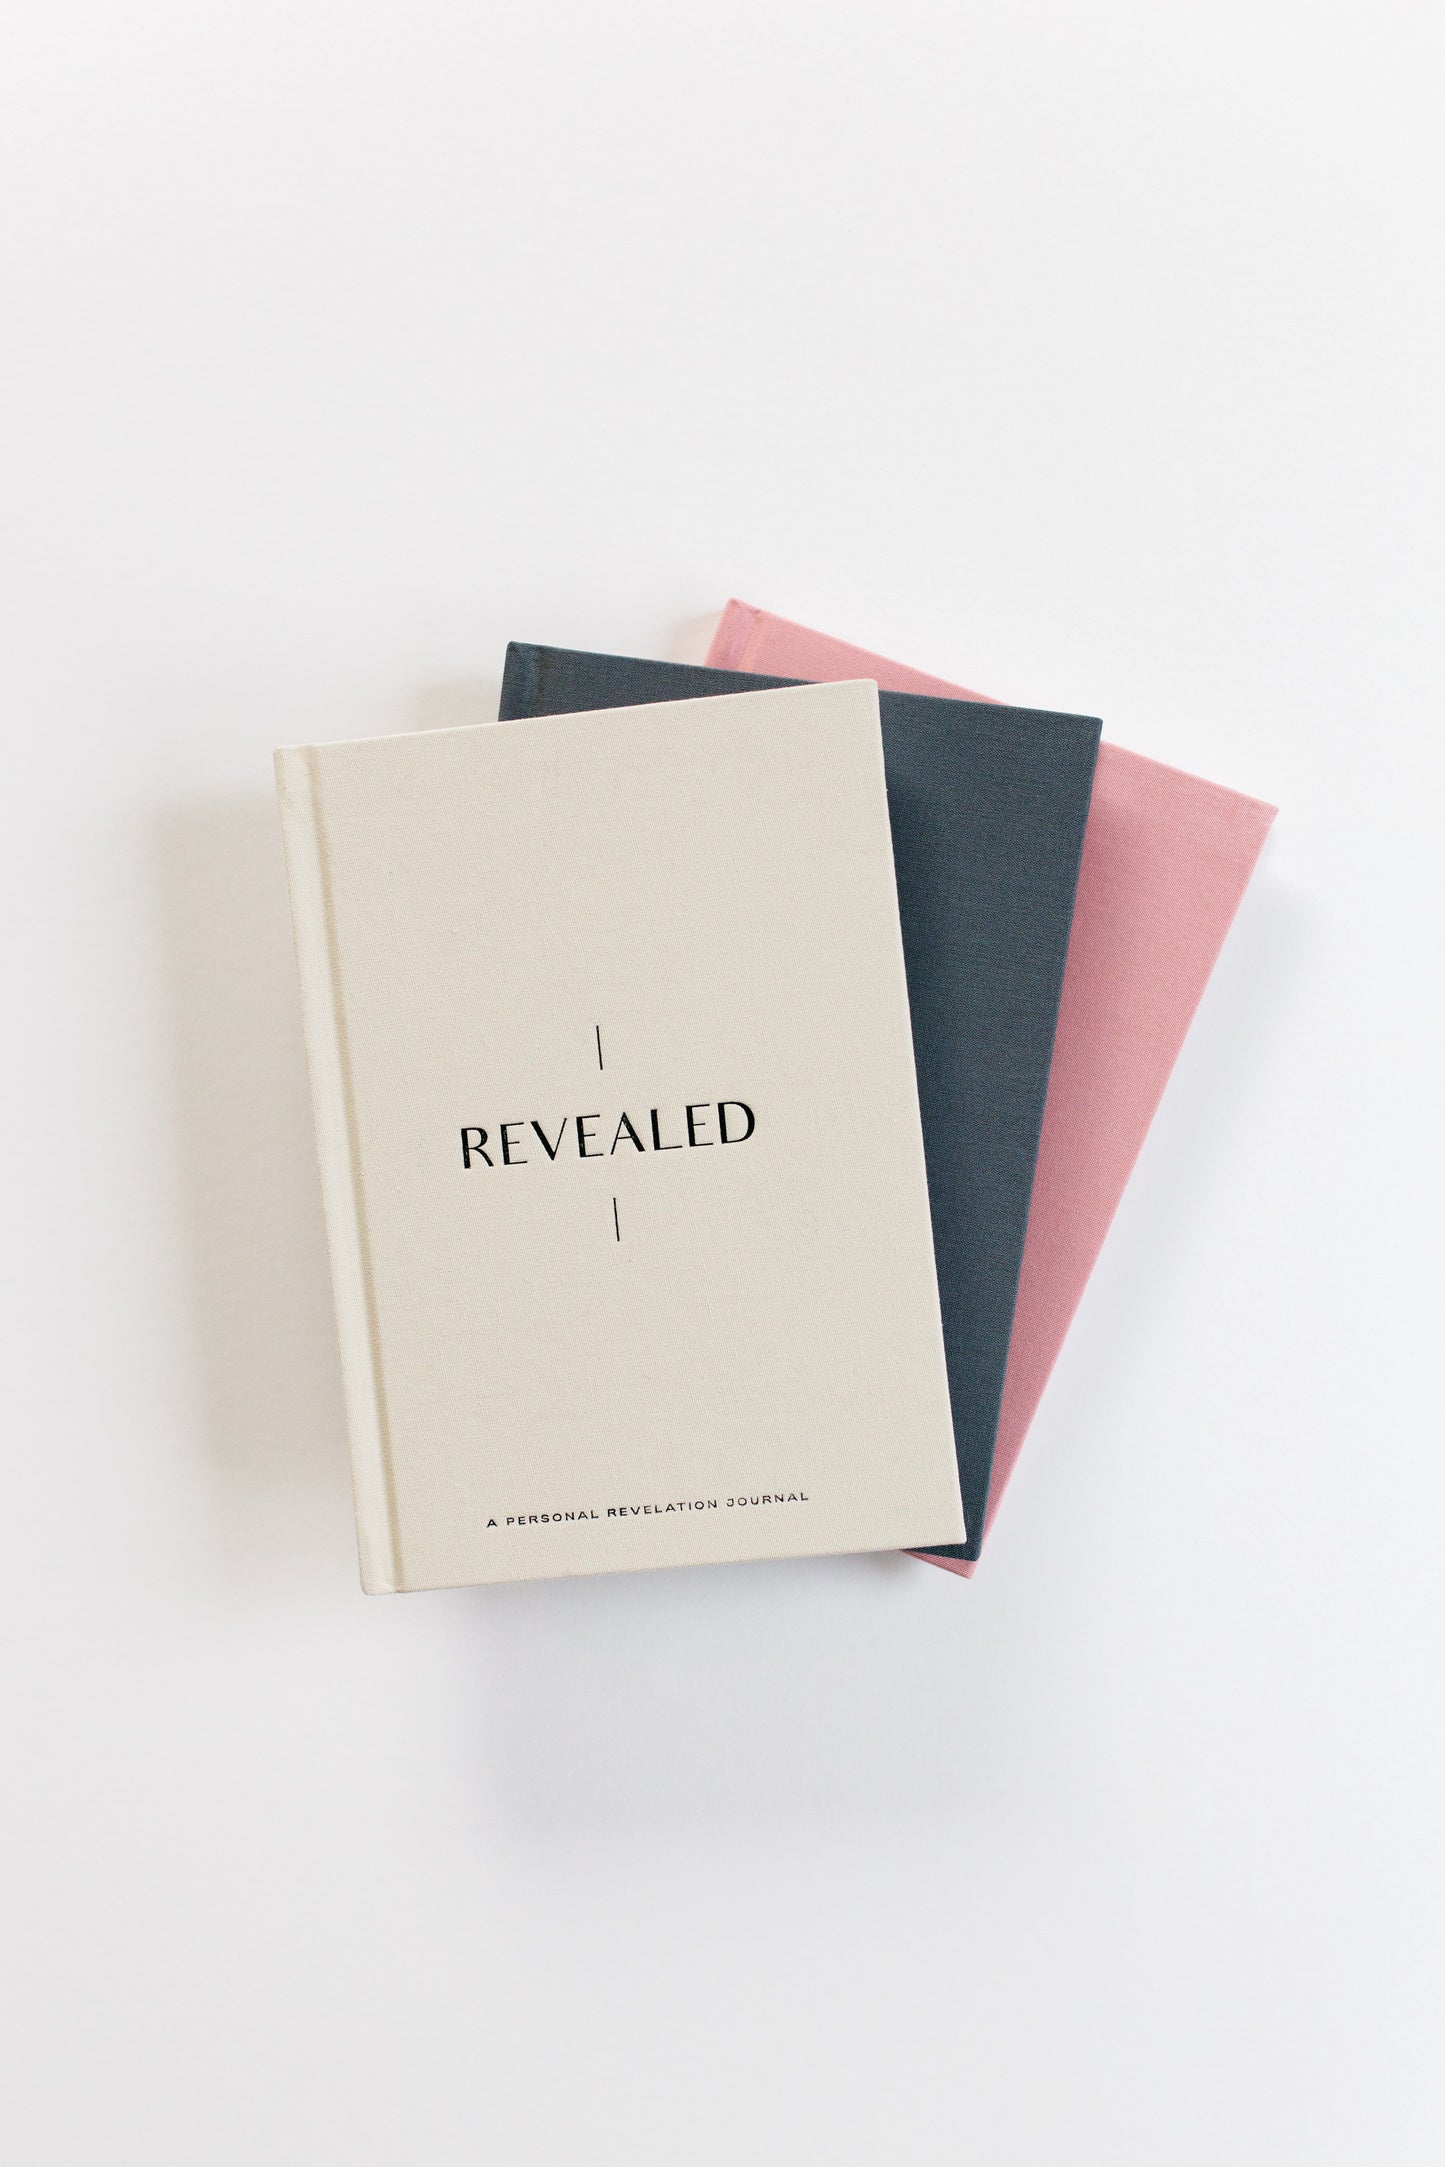 Revealed : A Personal Revelation Journal